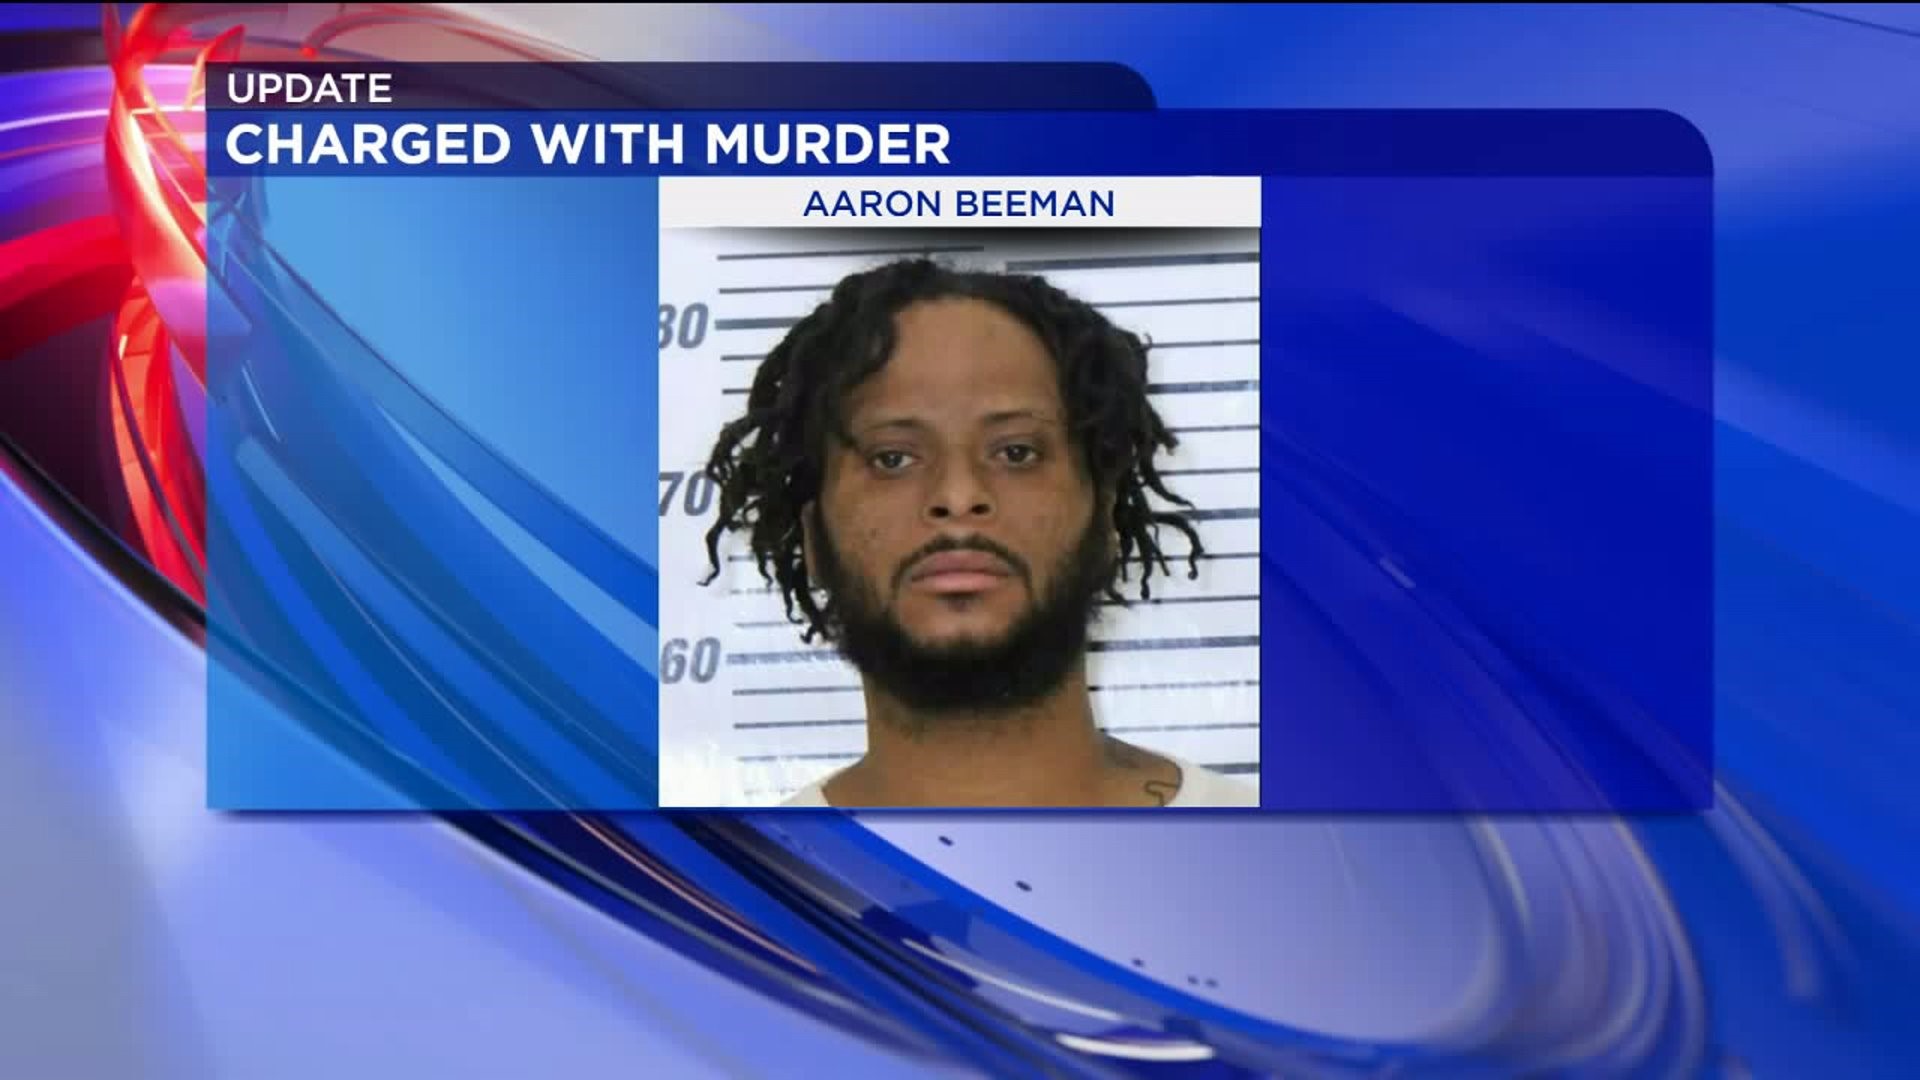 Rock Island man charged with 1st degree murder